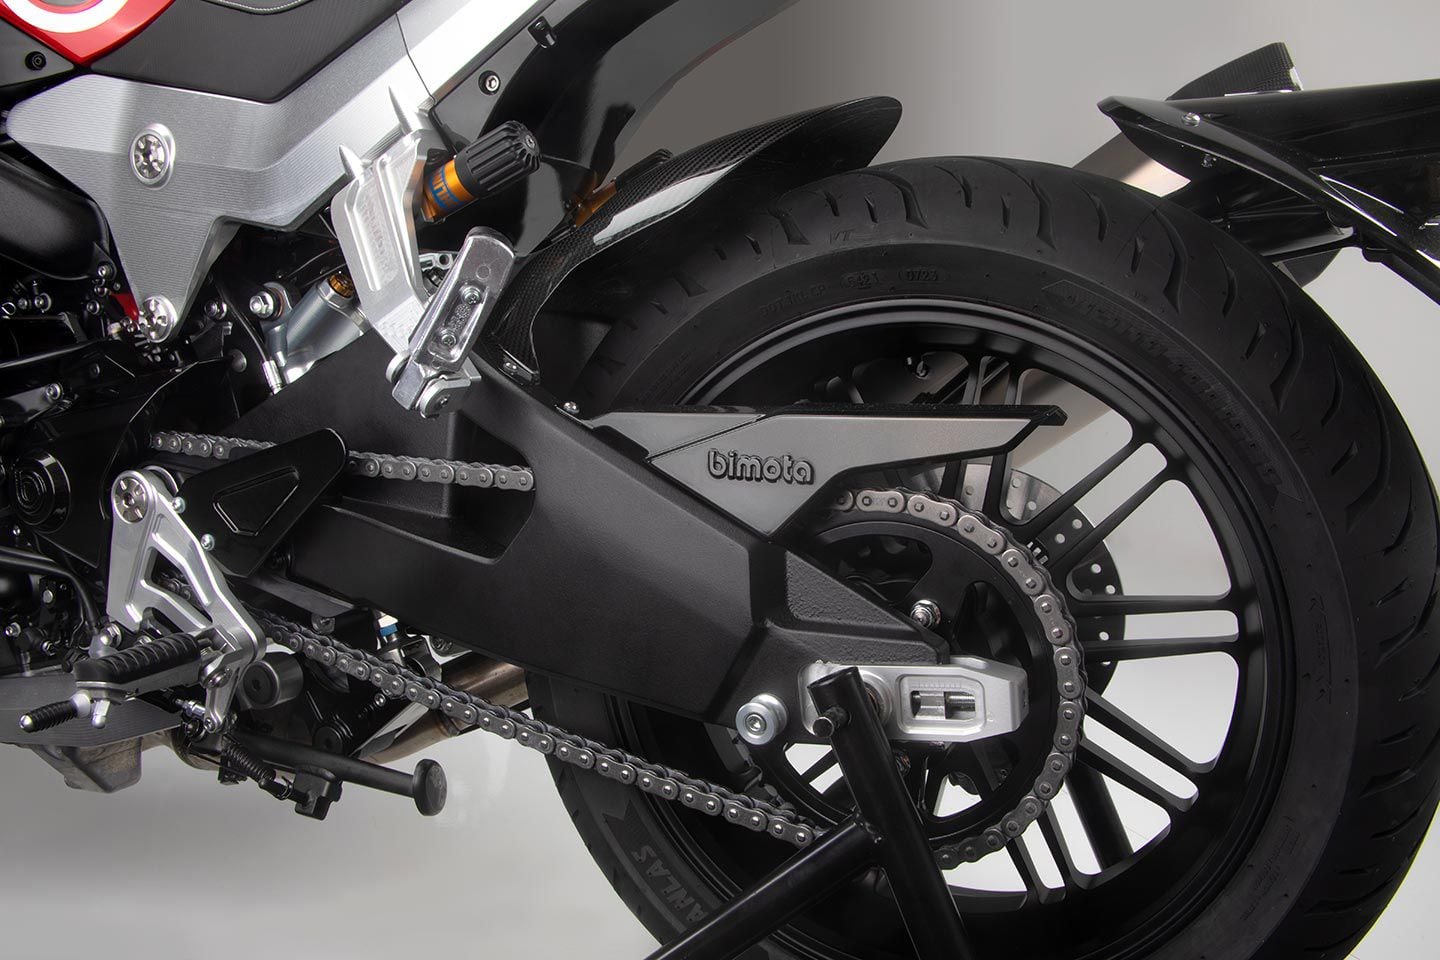 Close-up of the forged magnesium wheels and rear suspension.